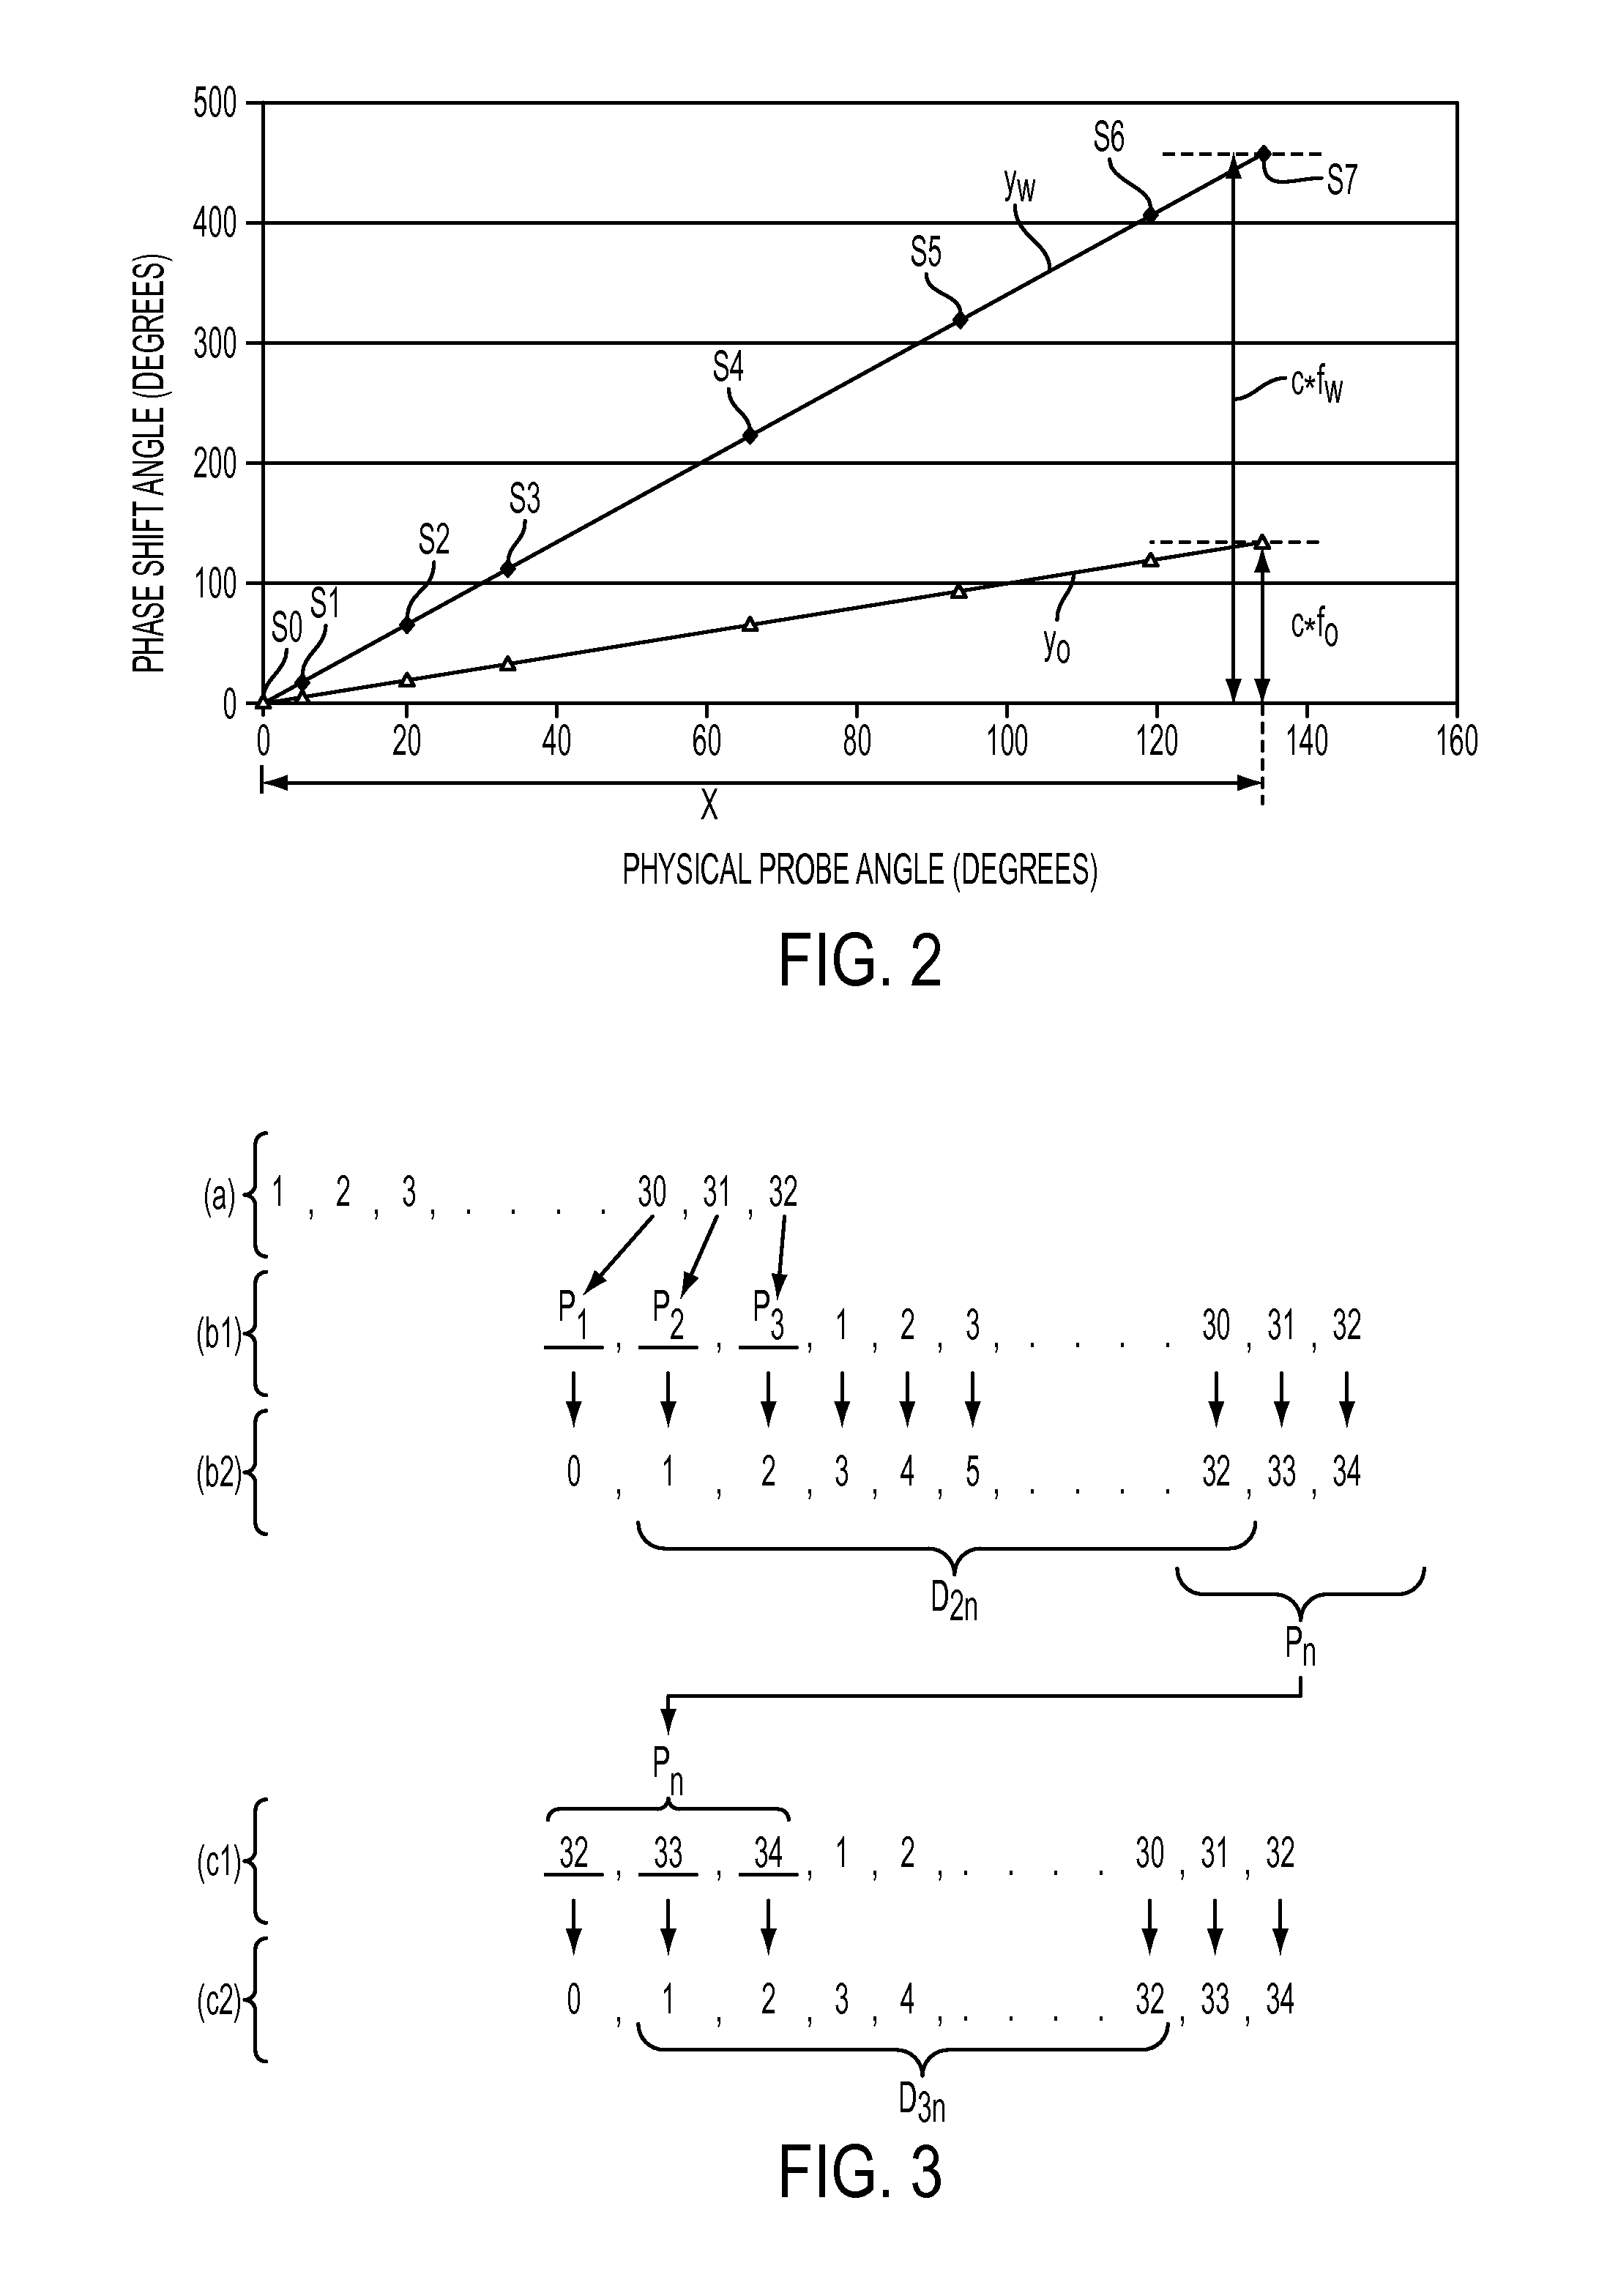 Method of Analyzing Non-Synchronous Vibrations Using a Dispersed Array Multi-Probe Machine